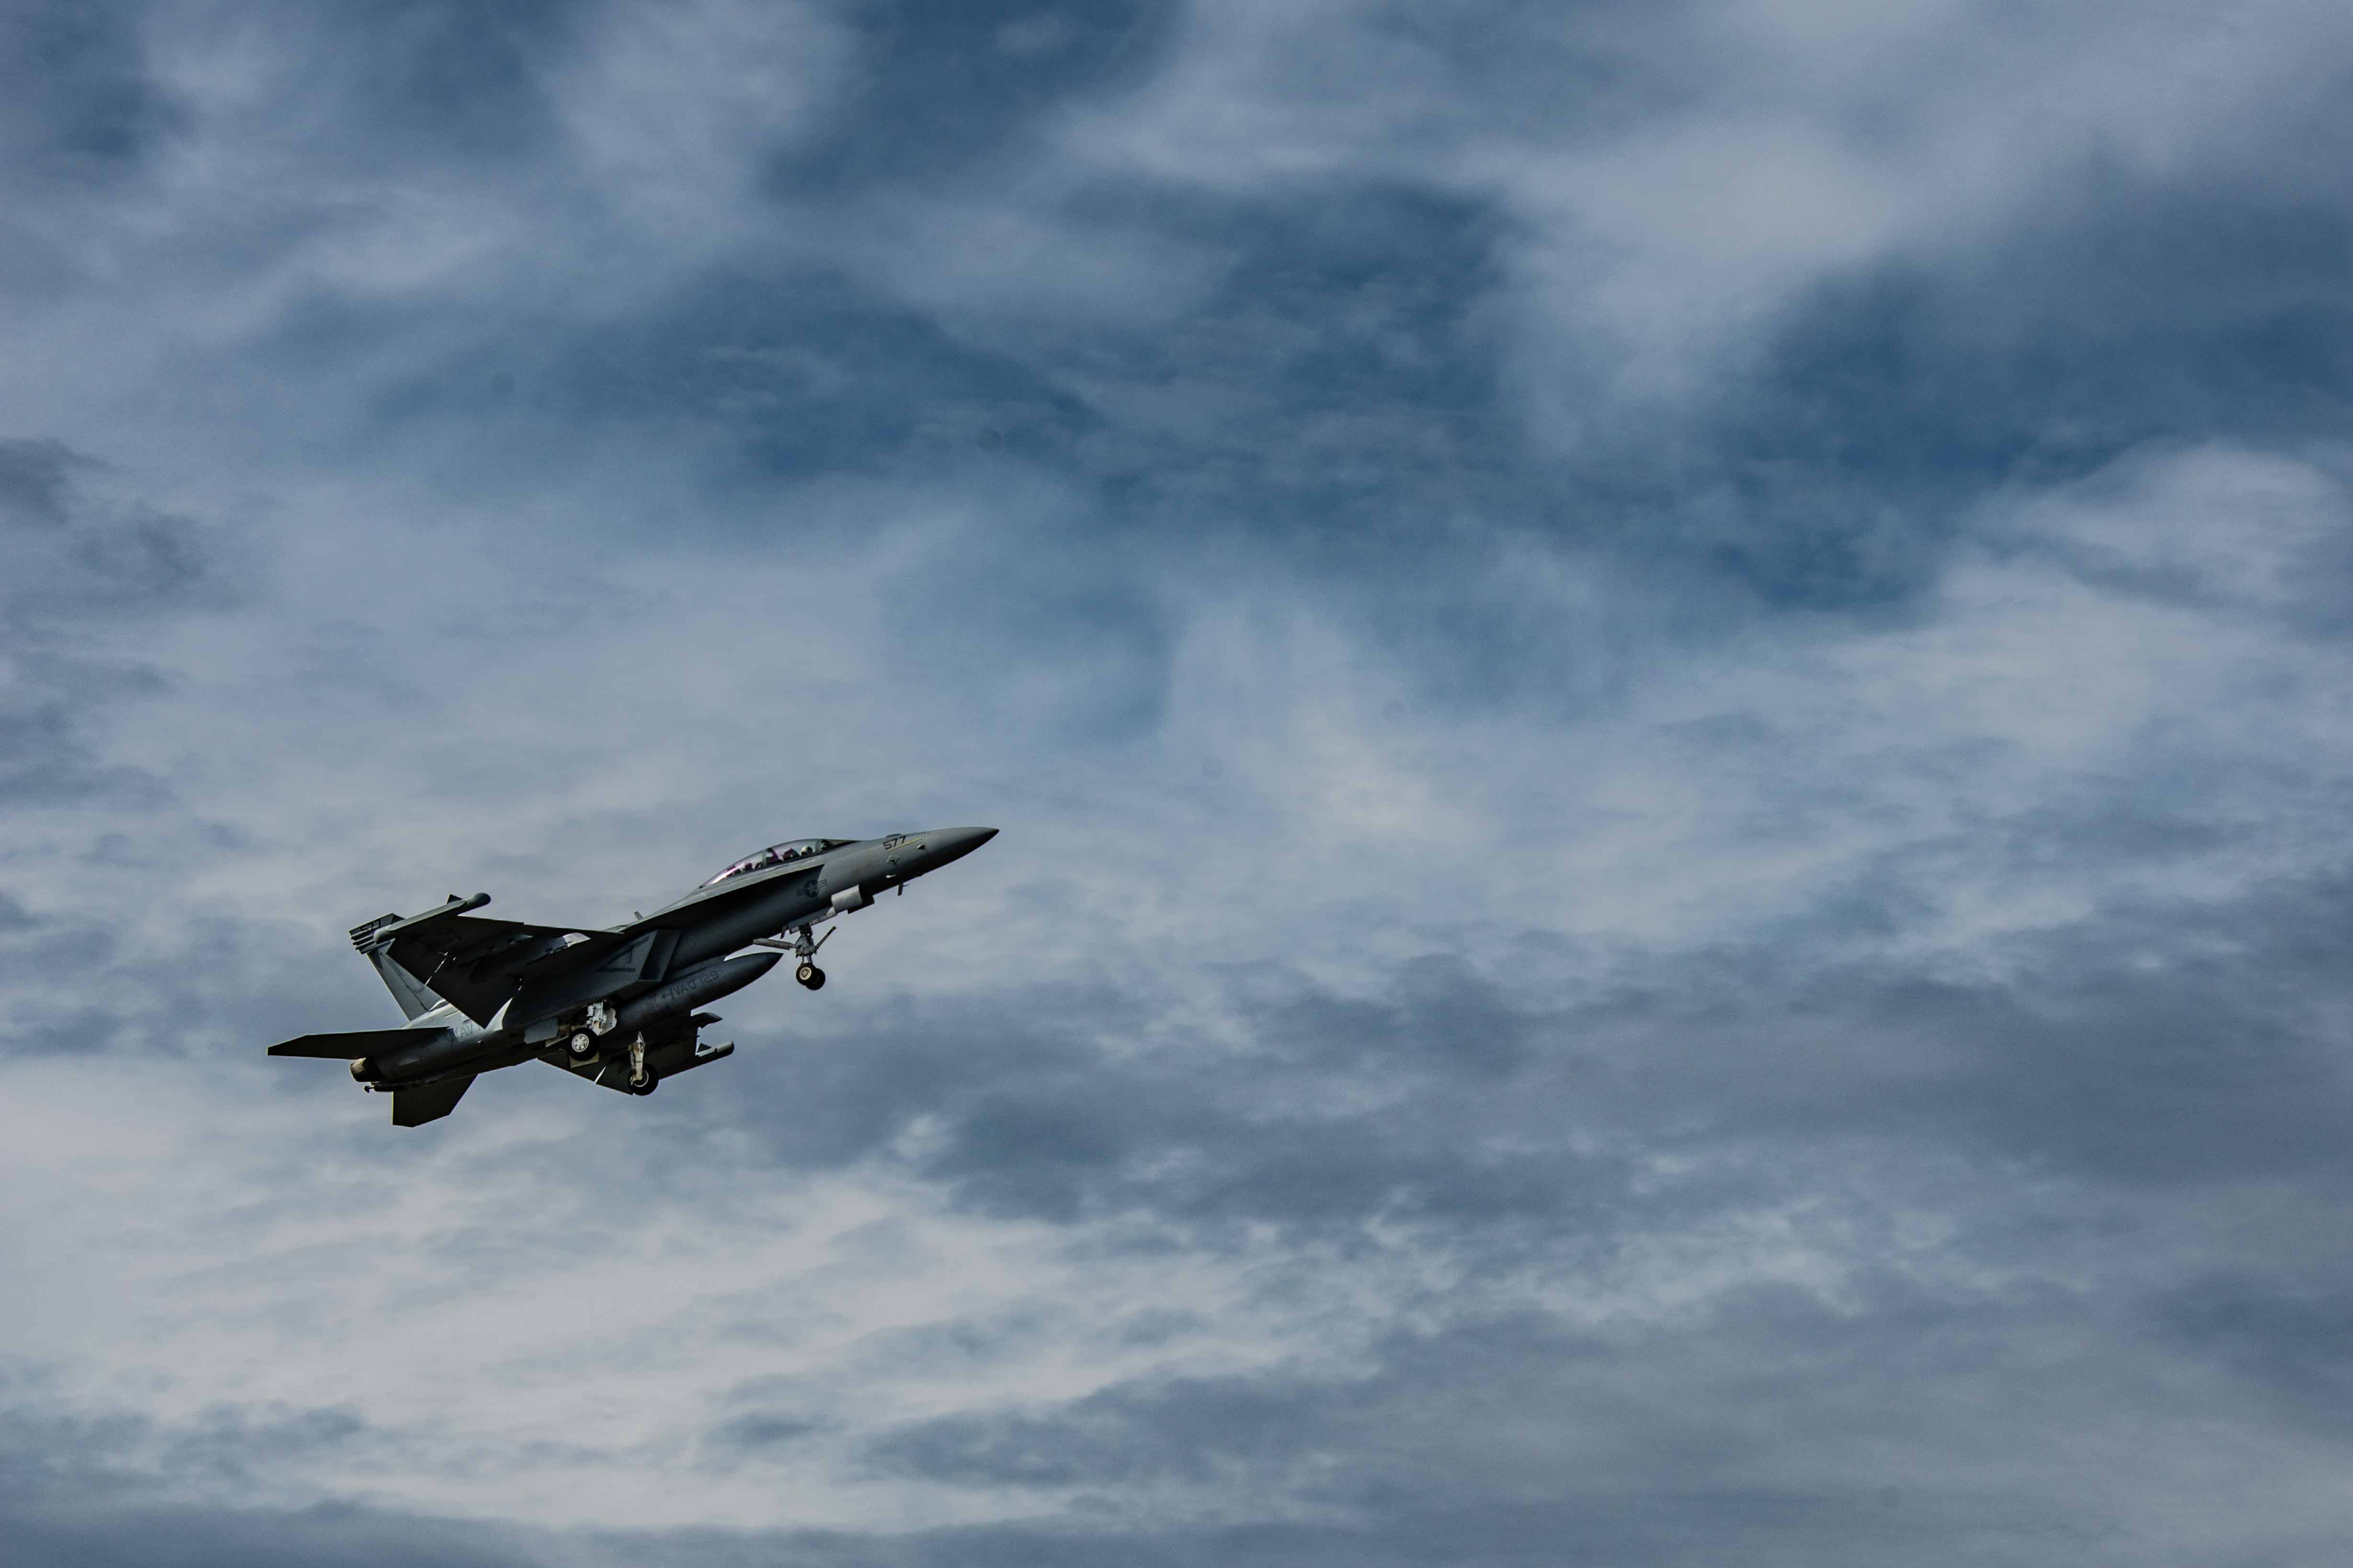 A military jet, the EA-18G growler in mid-air, as seen from the ground.